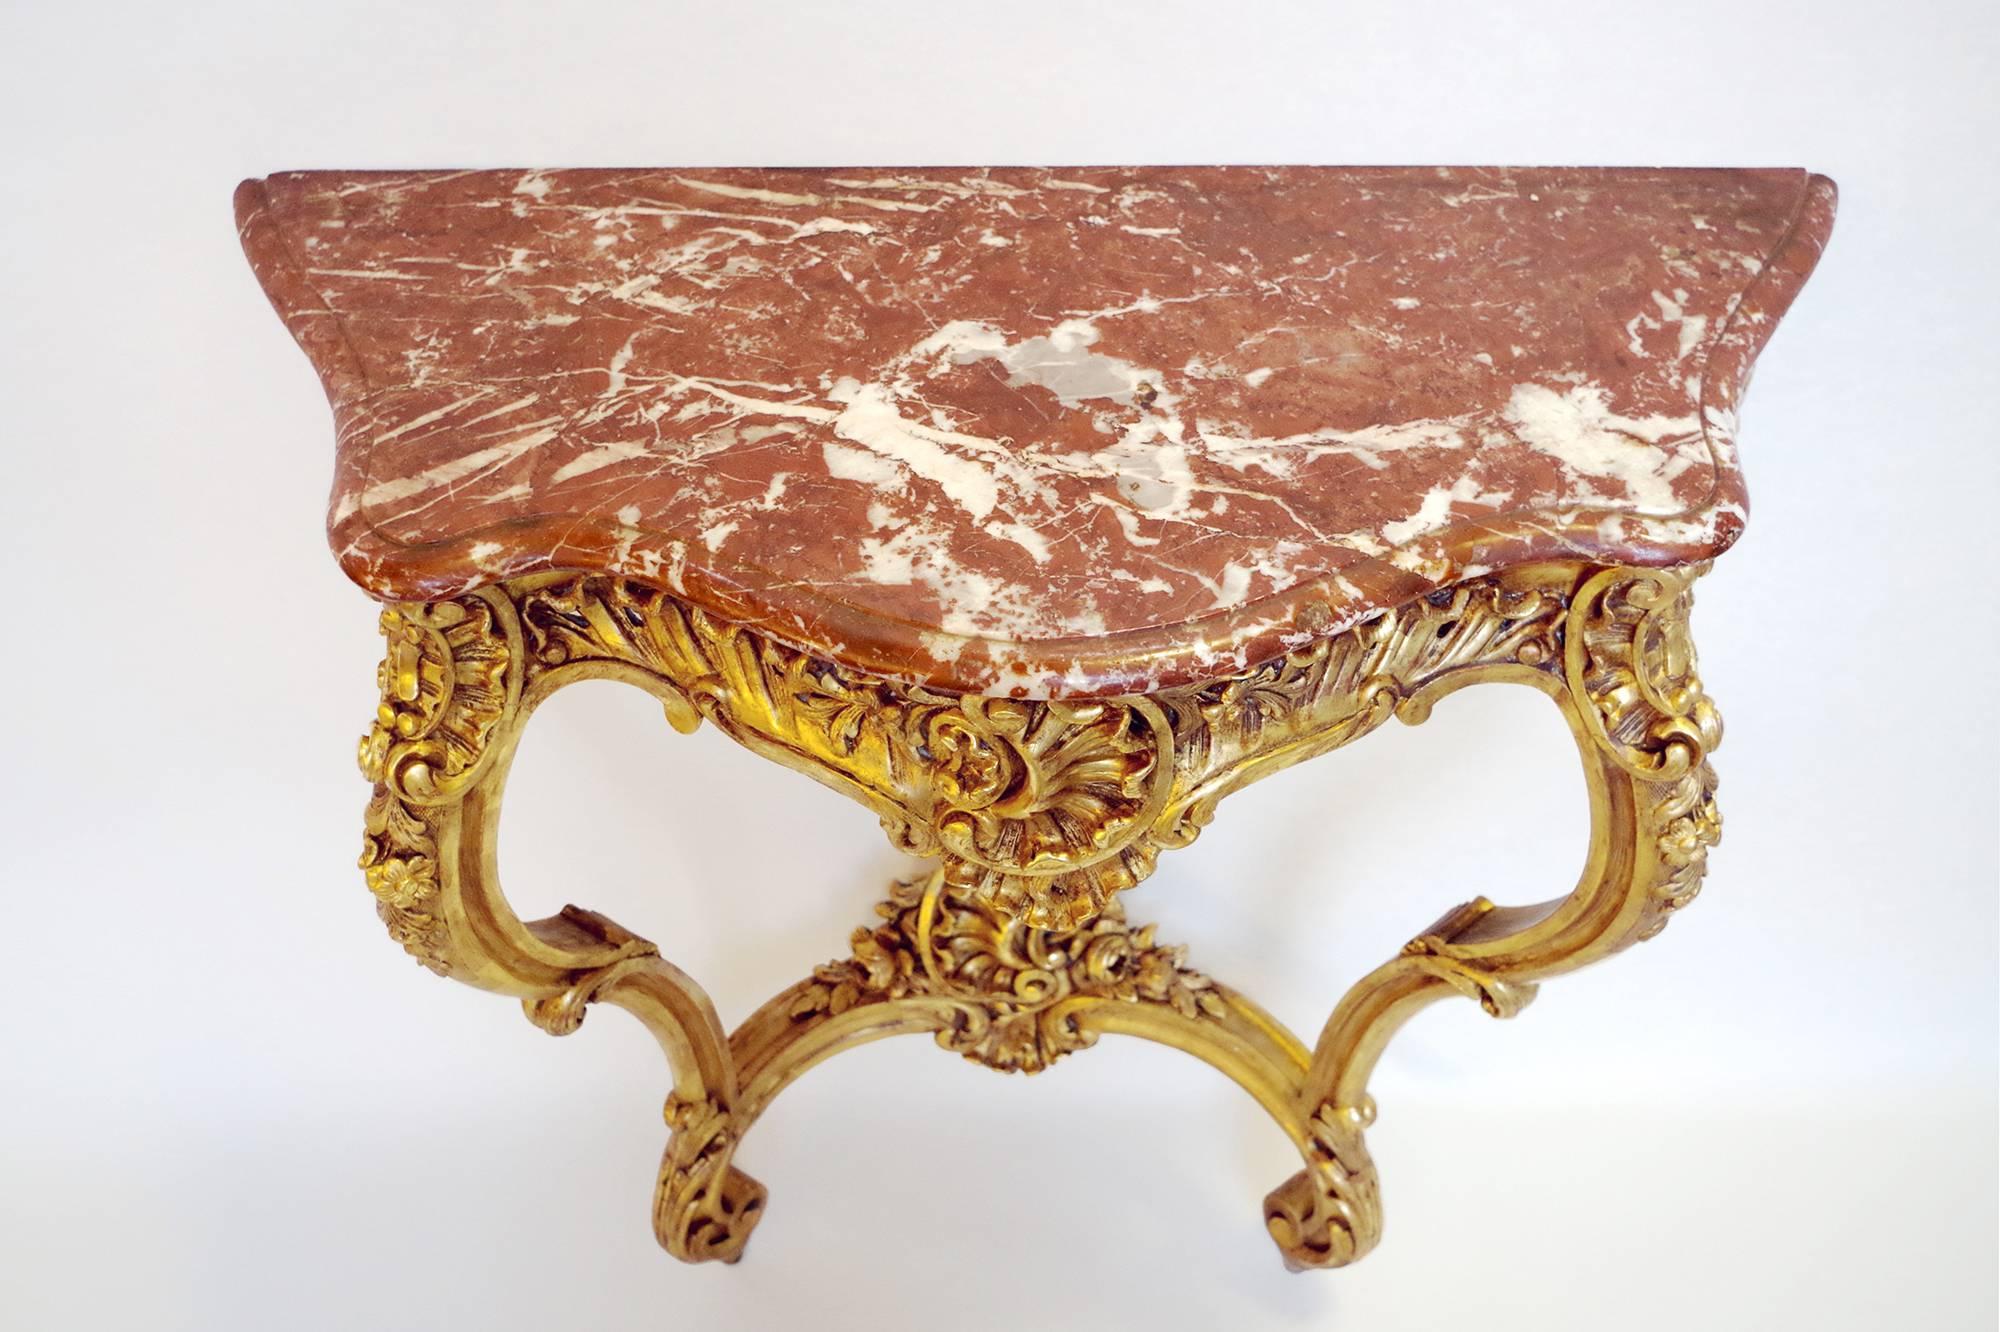 Louis XV style giltwood wall bracket standing on two carved legs ending in winding on shoes and joined by a brace. On the chantourné apron, the top of the legs and the brace, the carved wood is decorated with acanthus leaves, cockscombs and shells,